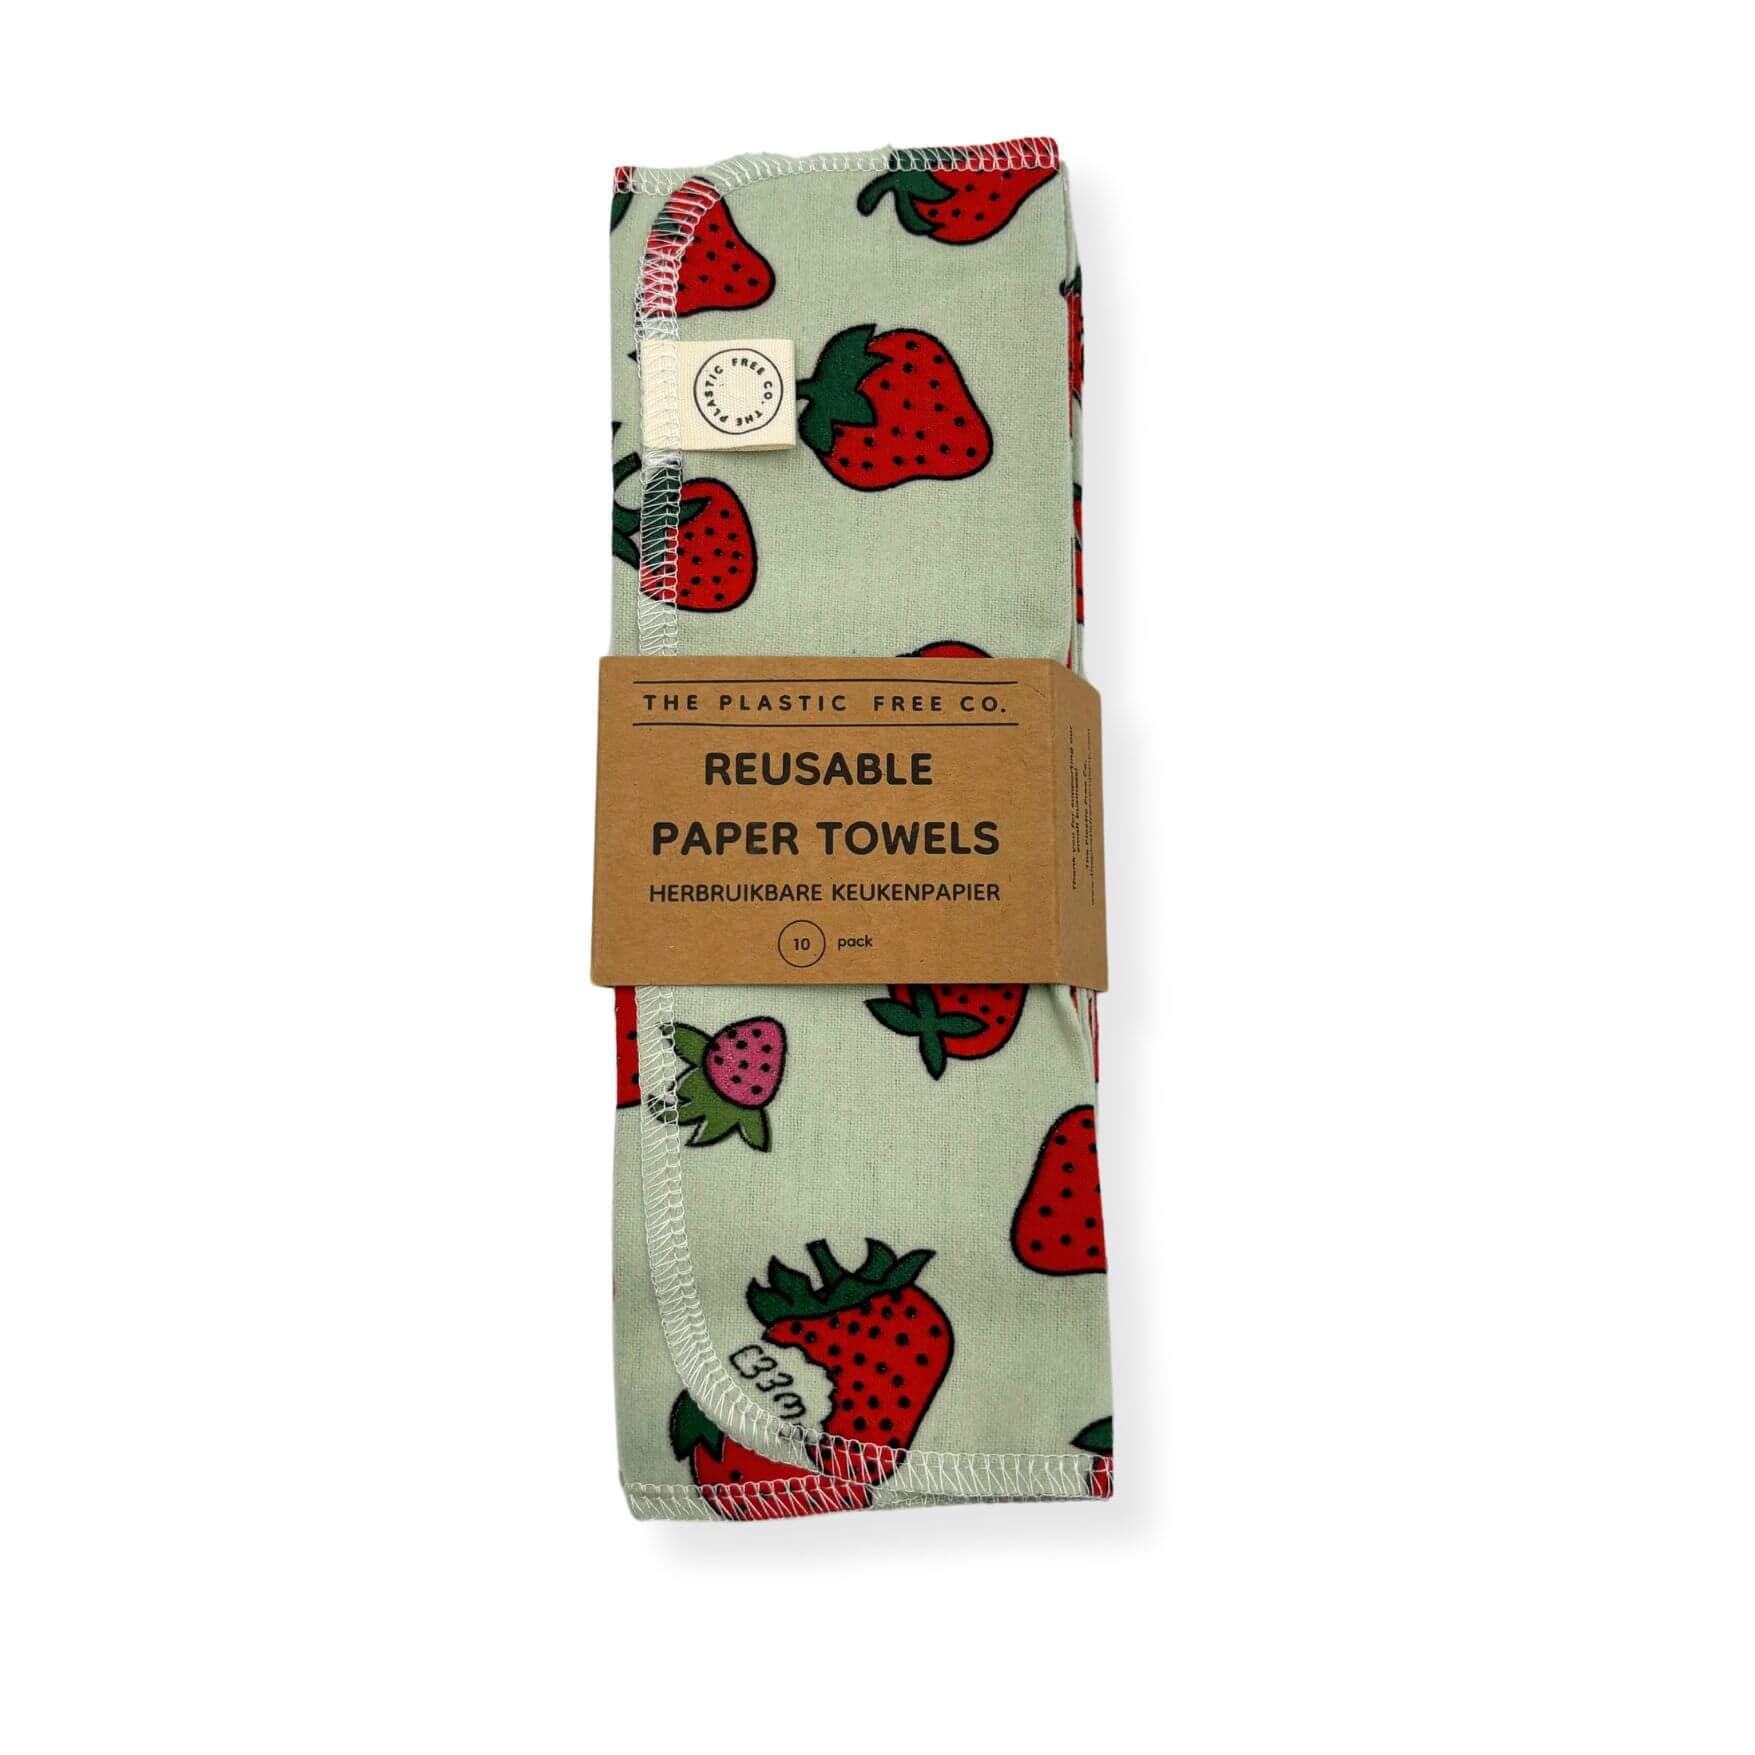 Reusable Paper Towels - The Plastic Free Co.